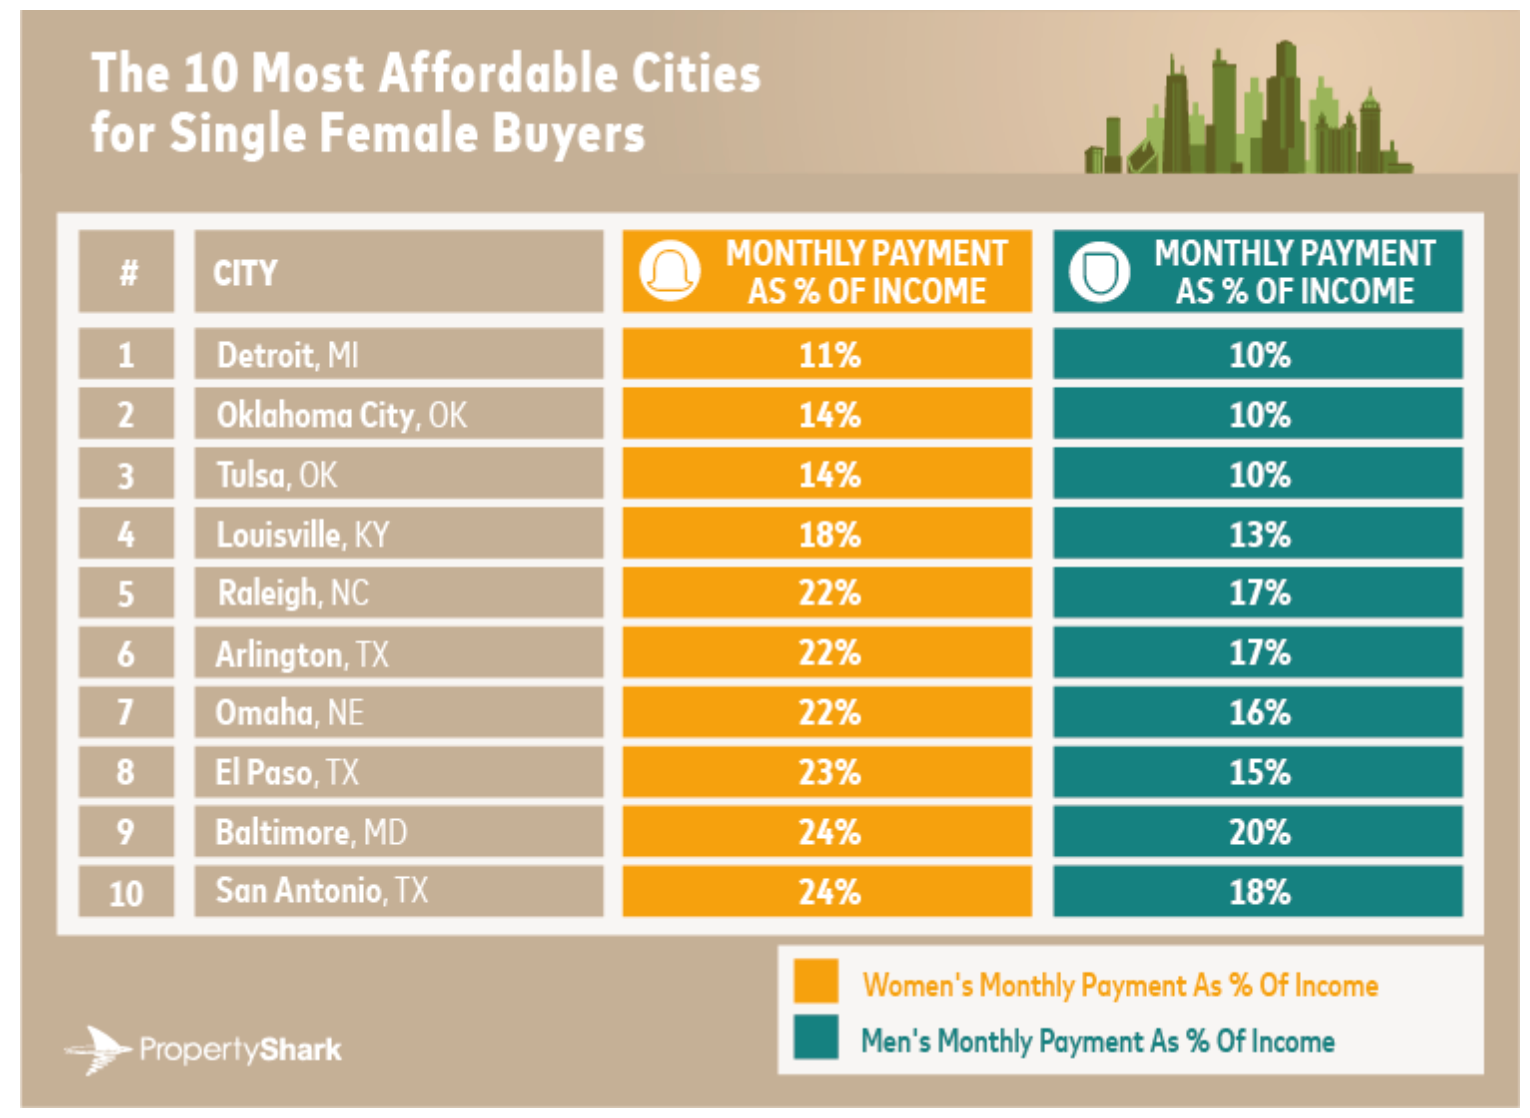 A graphic list showing the top 10 most affordable cities for single female buyers.